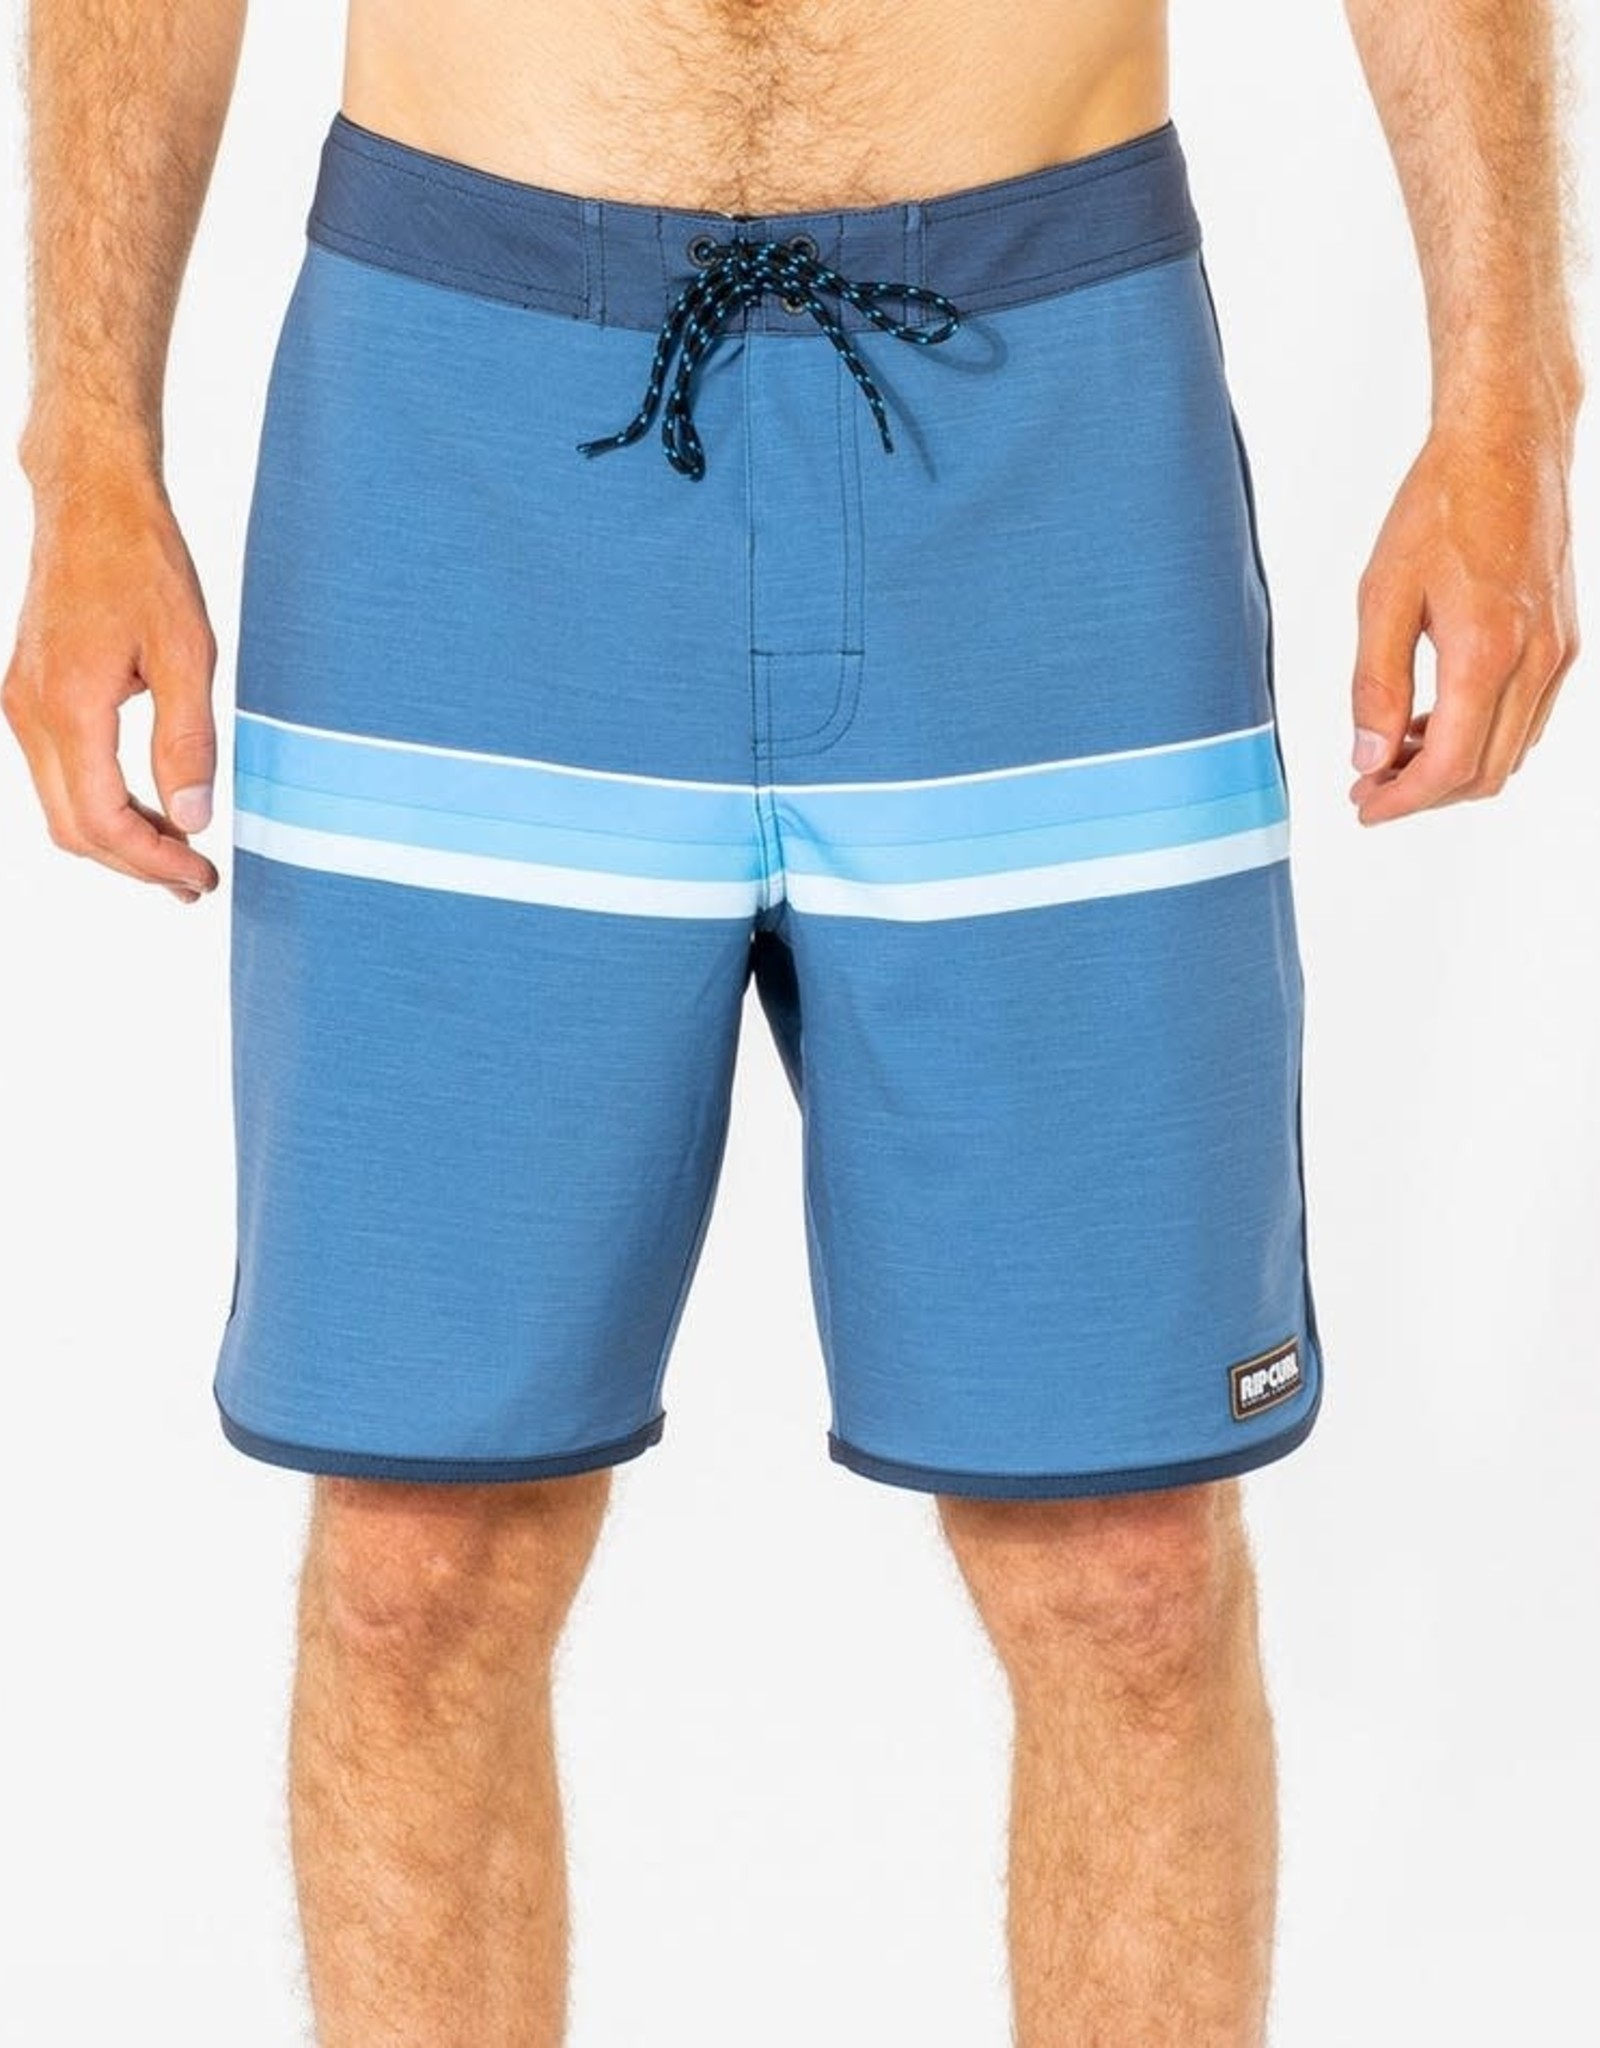 RIP CURL Mirage Surf Revival 19" Boardshorts